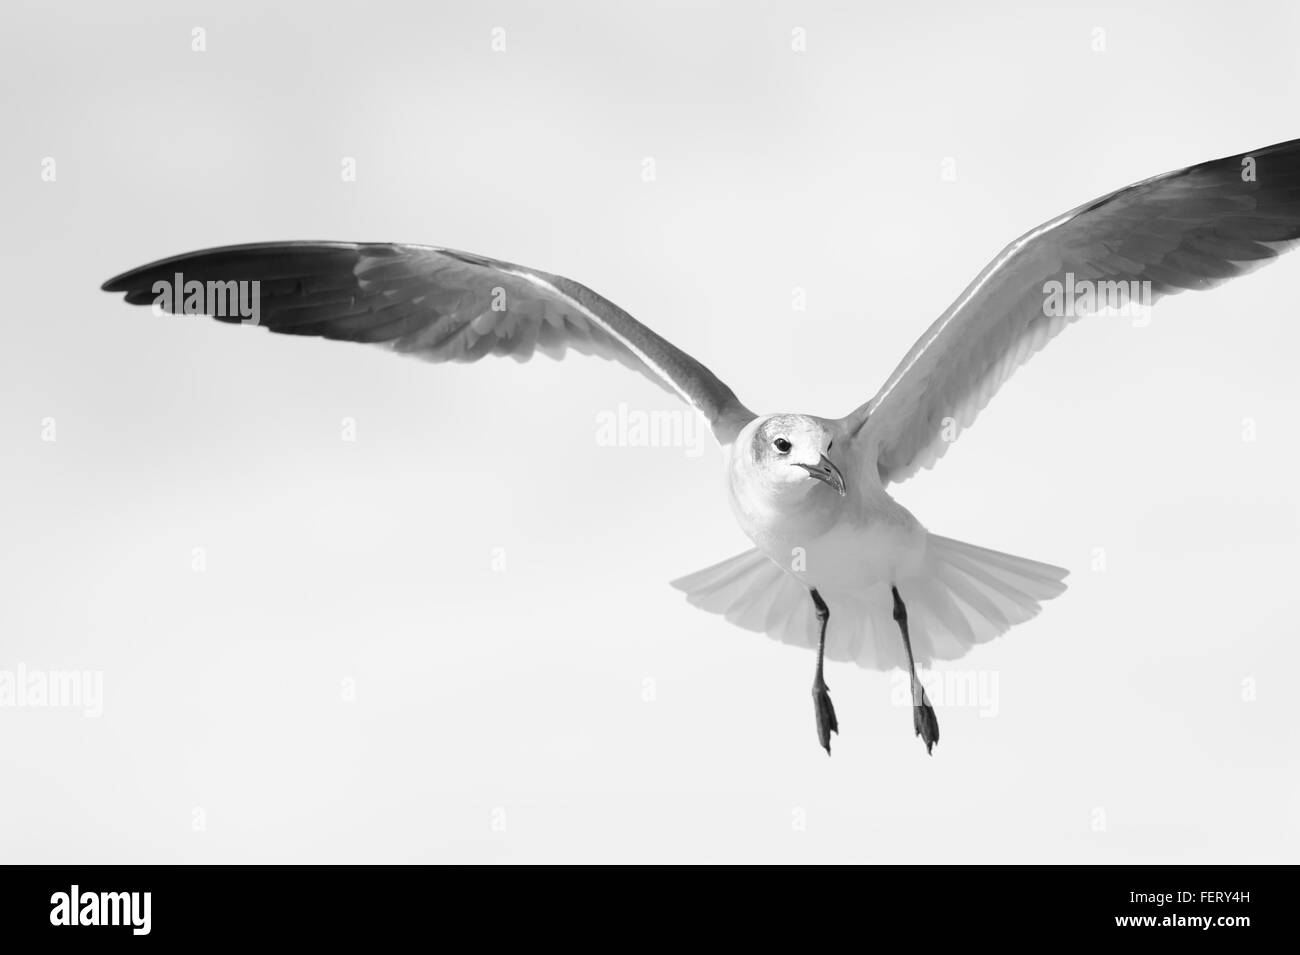 Bird flying is is a white bird spreading its wings in flight while fanning its tail against a soft blue and white cloud filled s Stock Photo